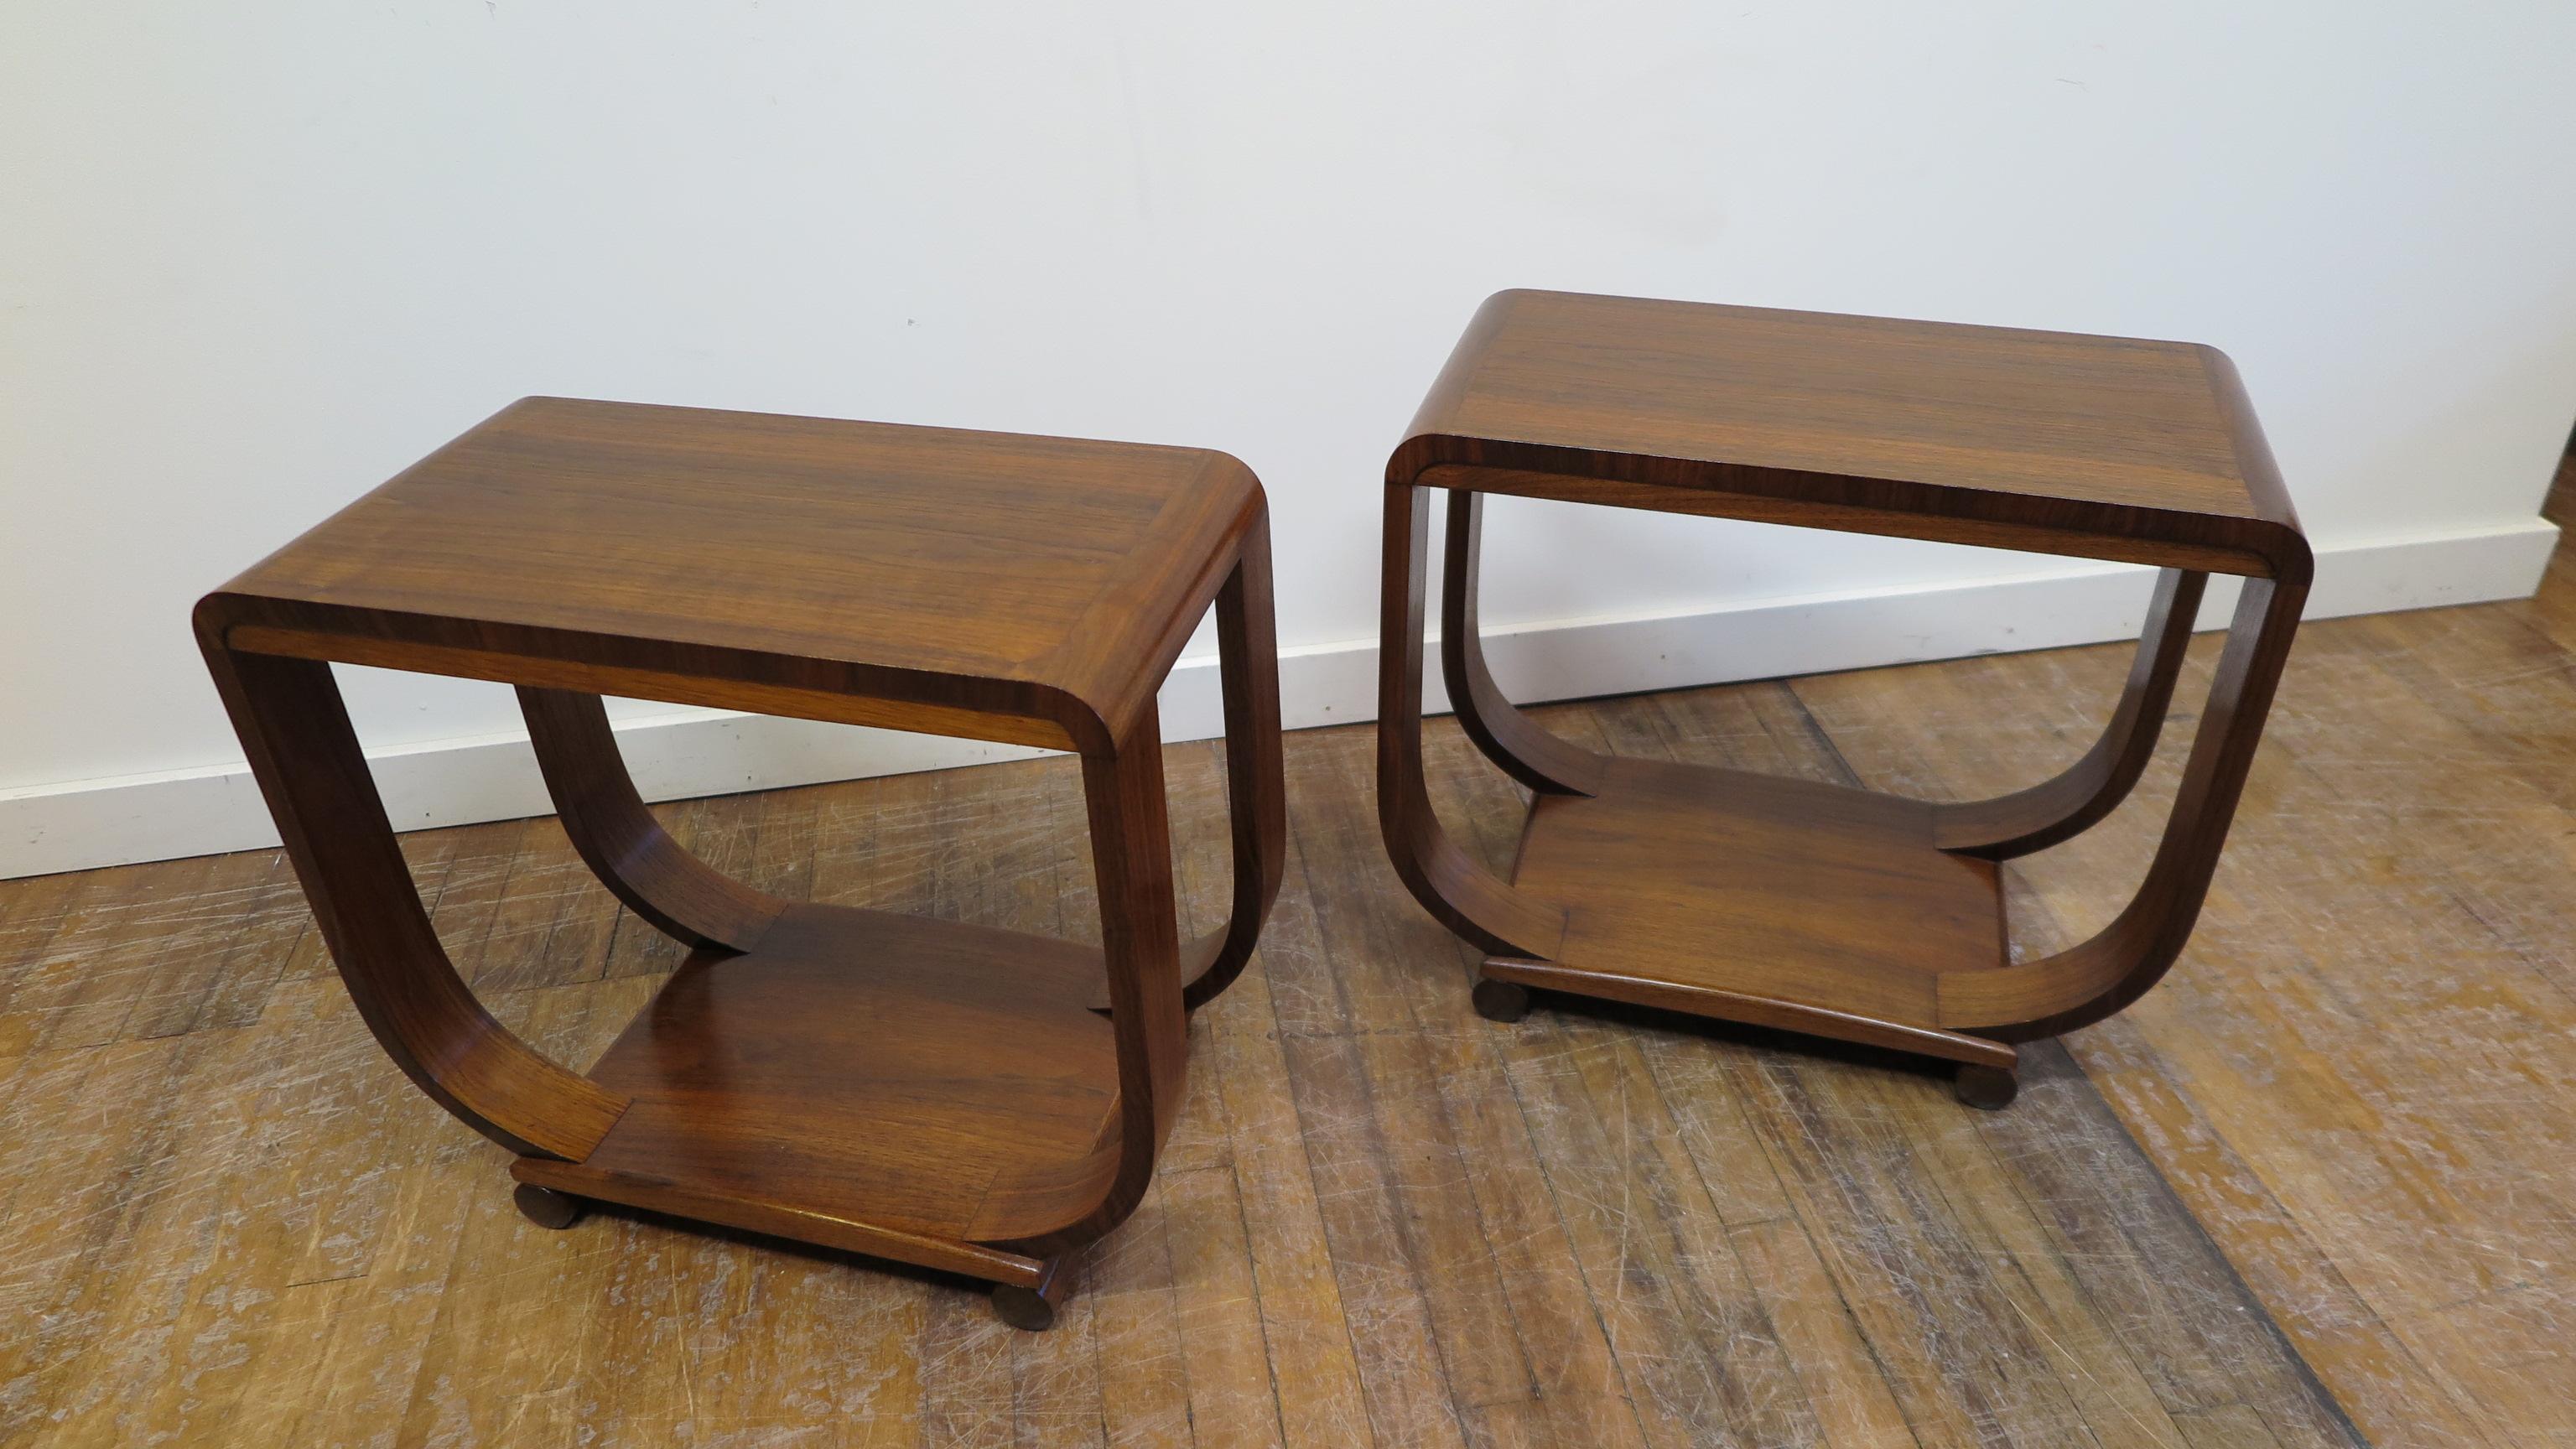 Elegant pair Art Deco Side Tables. Walnut veneer Side Tables with Radius edge top, banded side detail, turned in legs atop a raised arch platform on cylindrical feet. Finely crafted in very good condition.